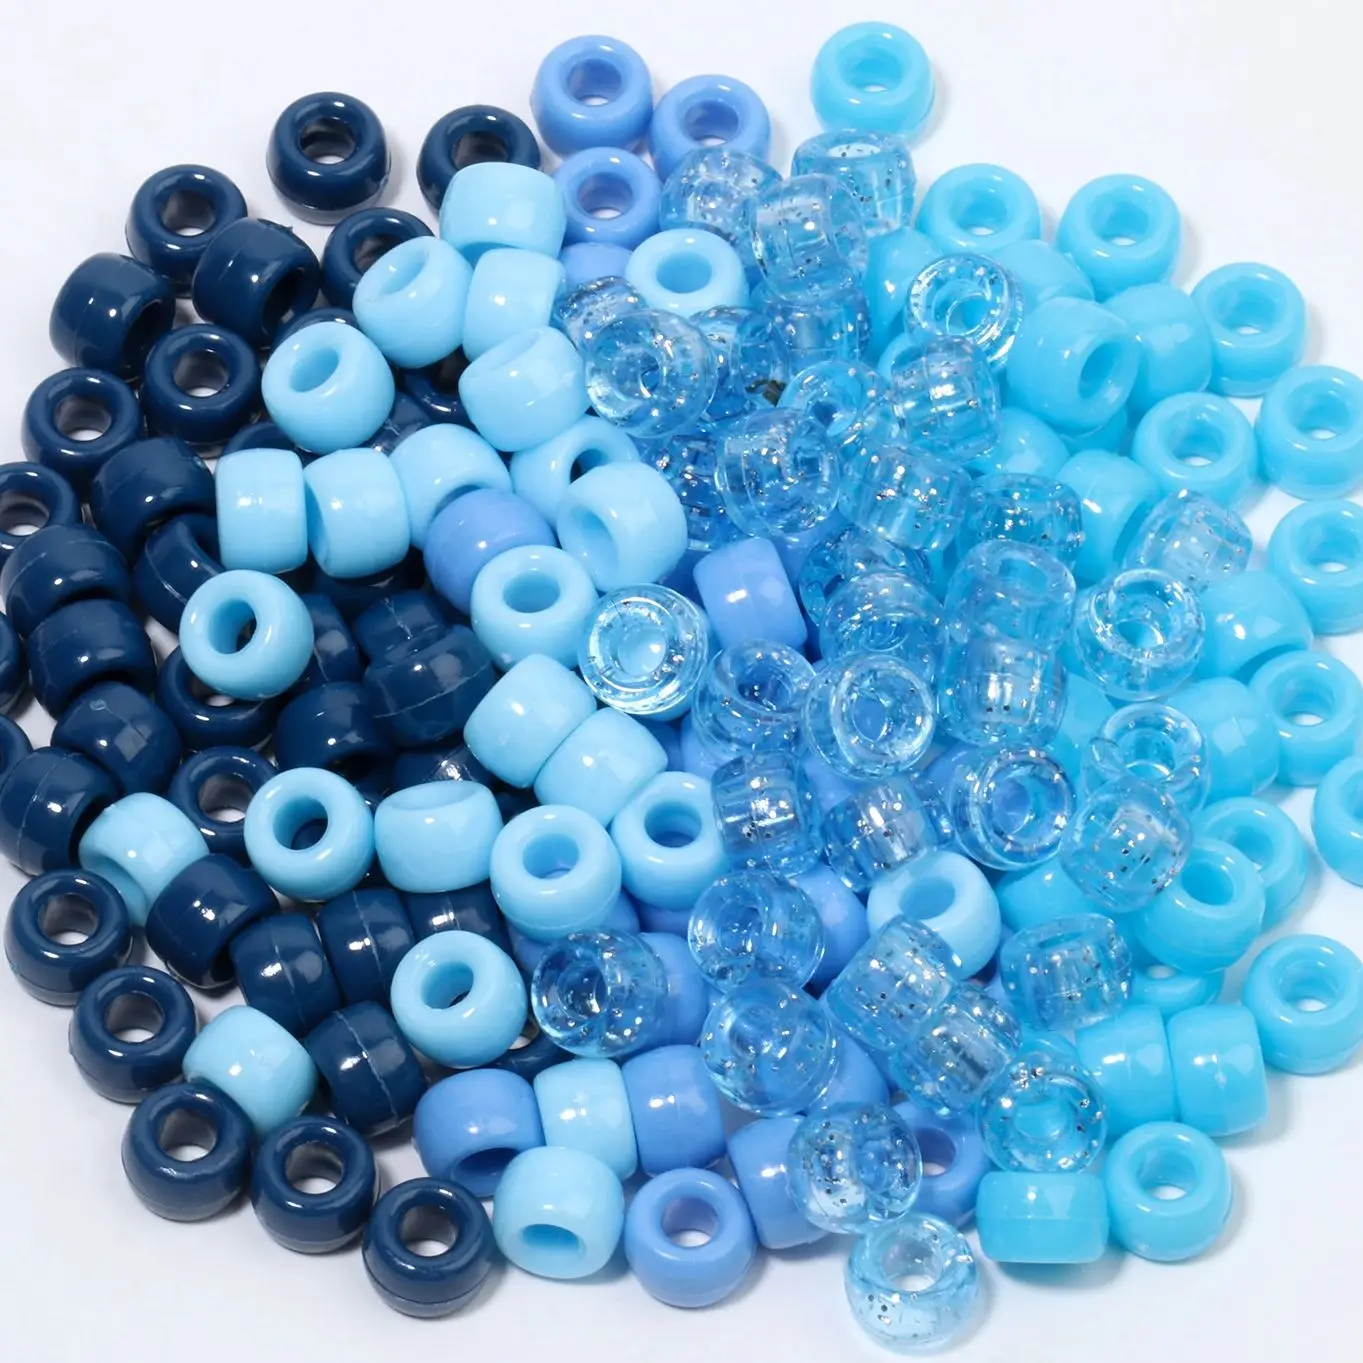 

1200pcs Pony Beads Blue Color Acrylic Flat Round Spacer Beads Jewelry Handmade Charms Make DIY Bracelets Necklace Accessory Gift